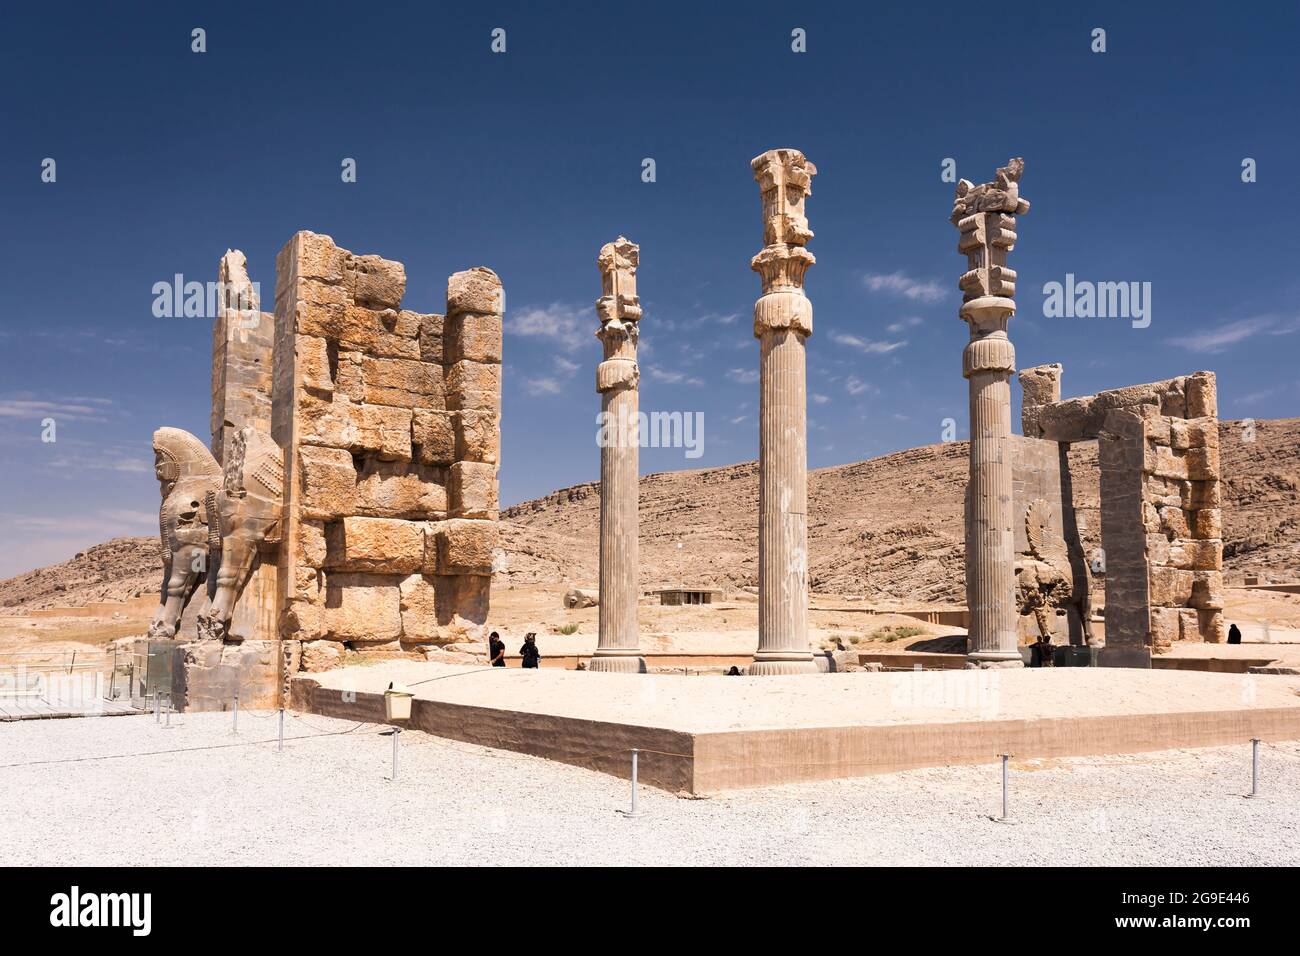 Persepolis, gate of all nations, gate of Xerxes, capital of Achaemenid empire, Fars Province, Iran, Persia, Western Asia, Asia Stock Photo